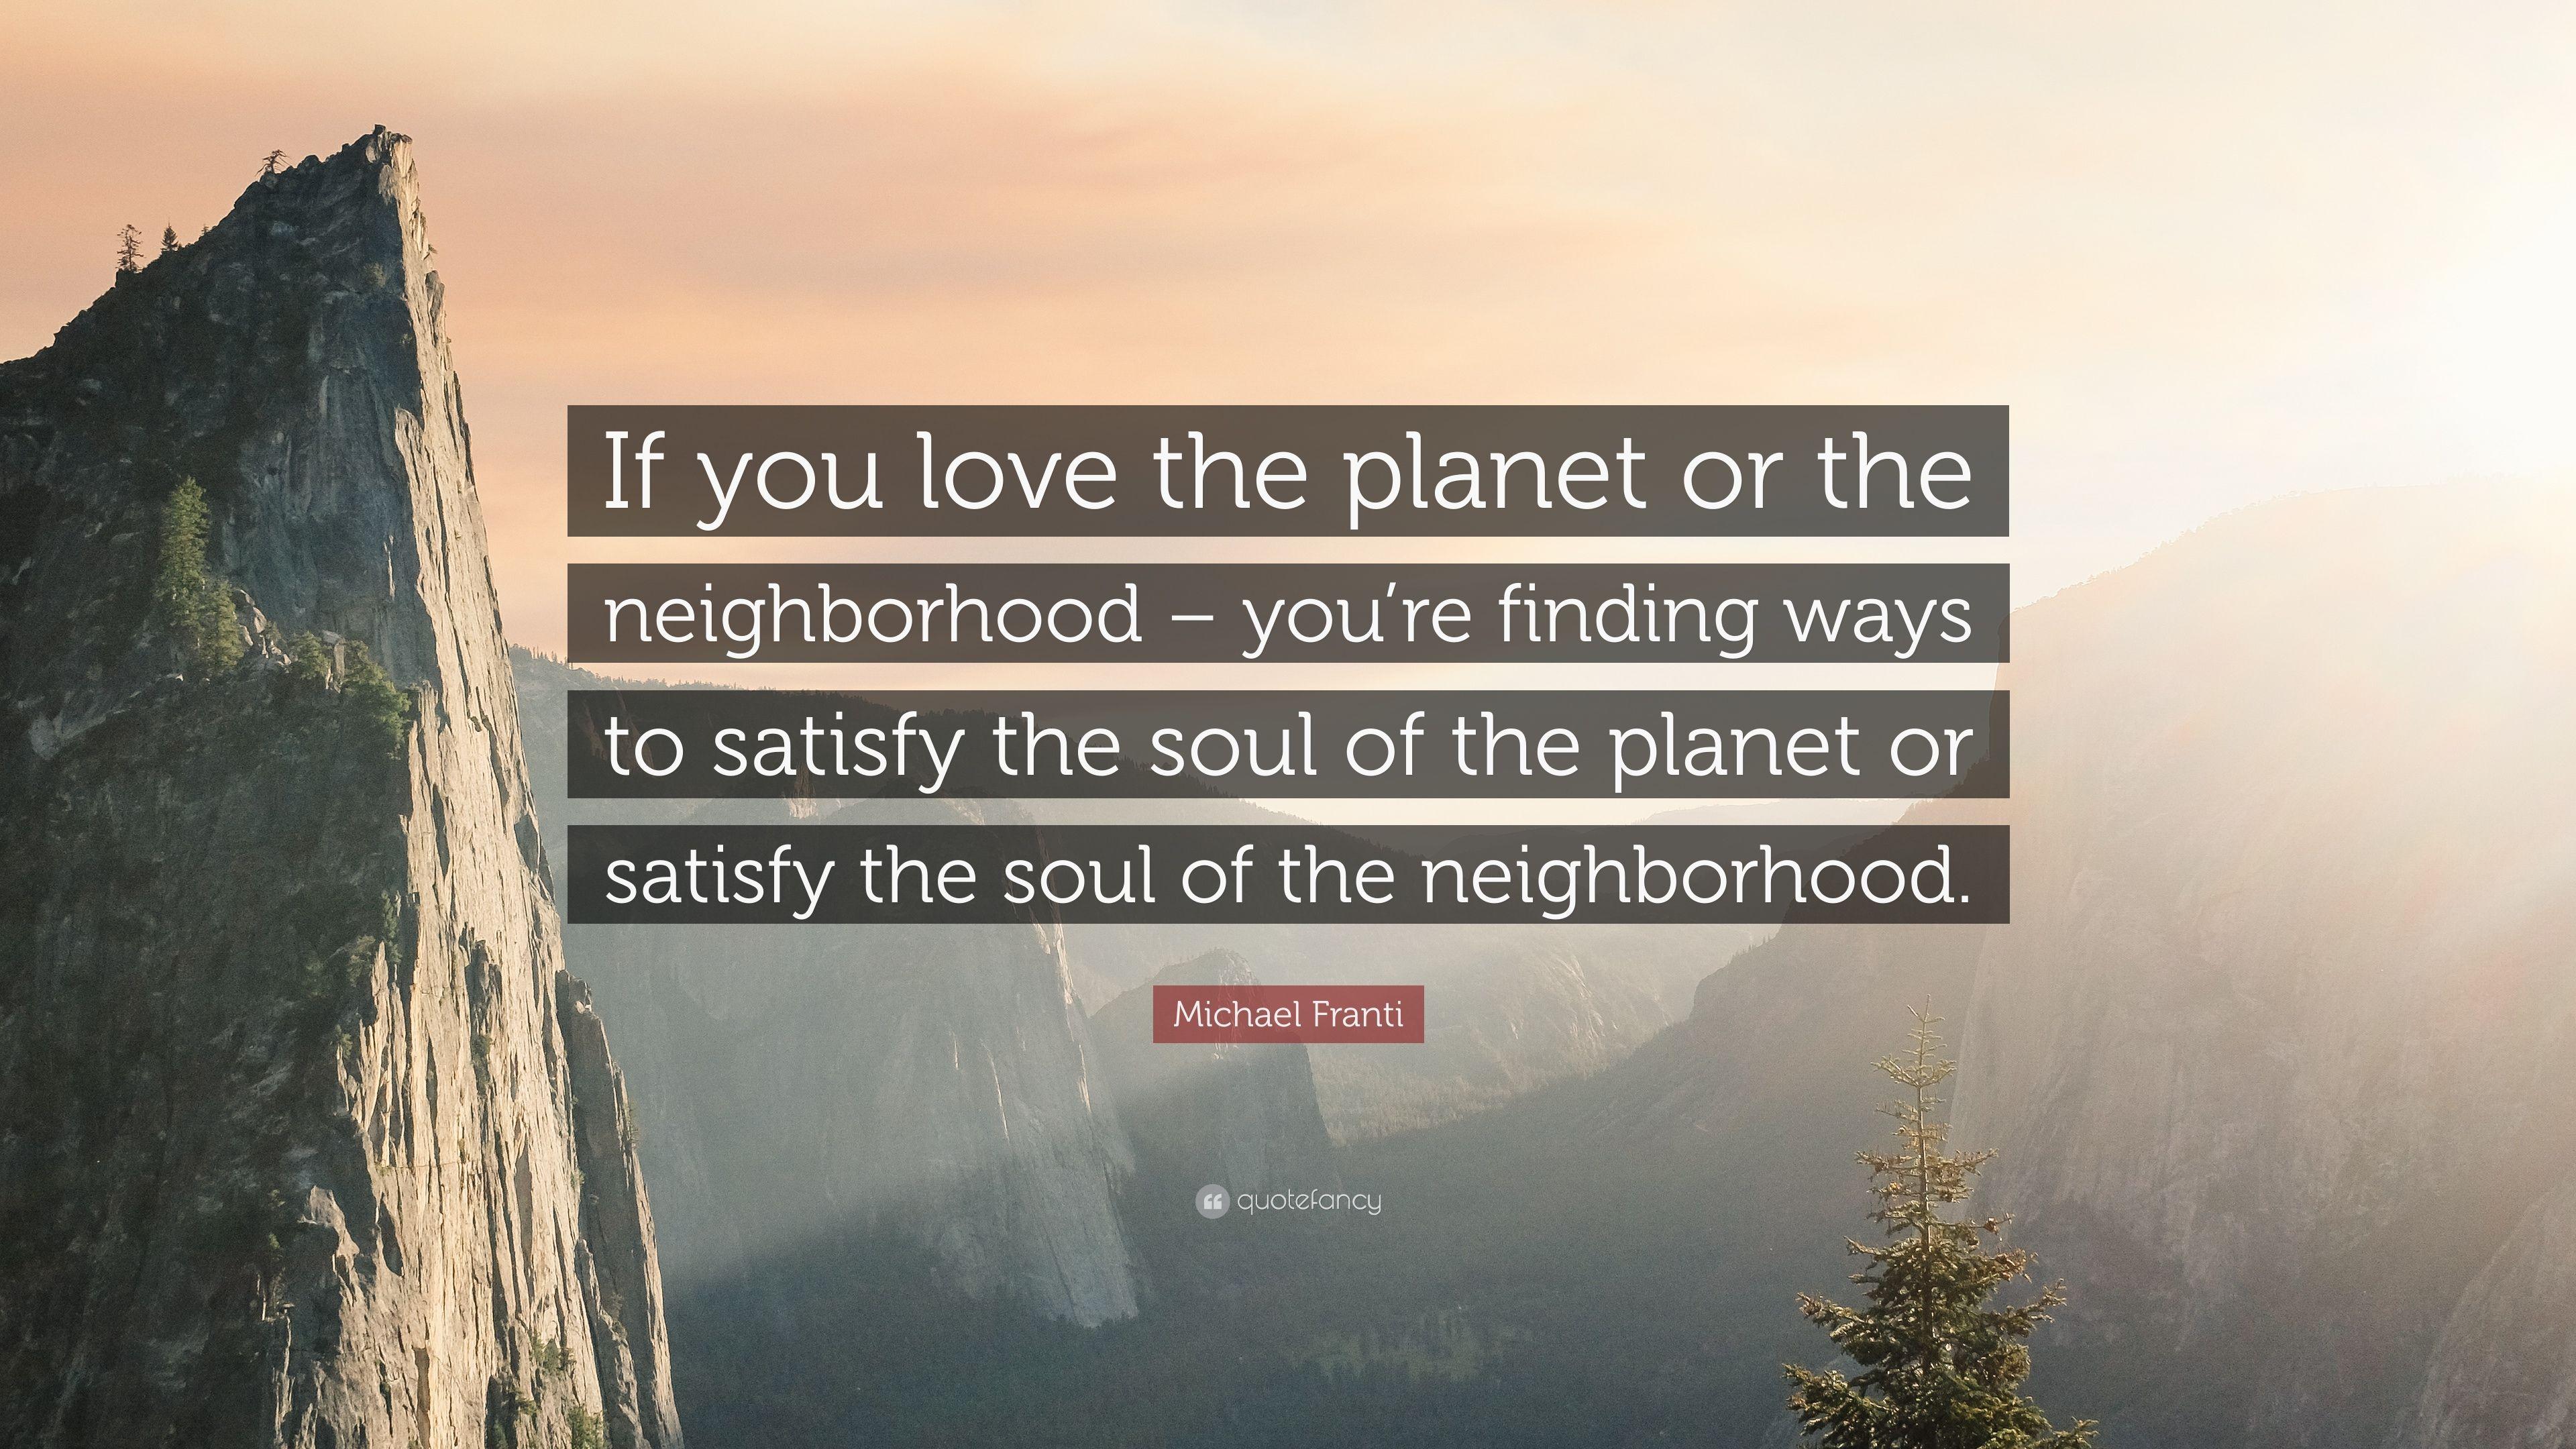 Michael Franti Quote: “If you love the planet or the neighborhood